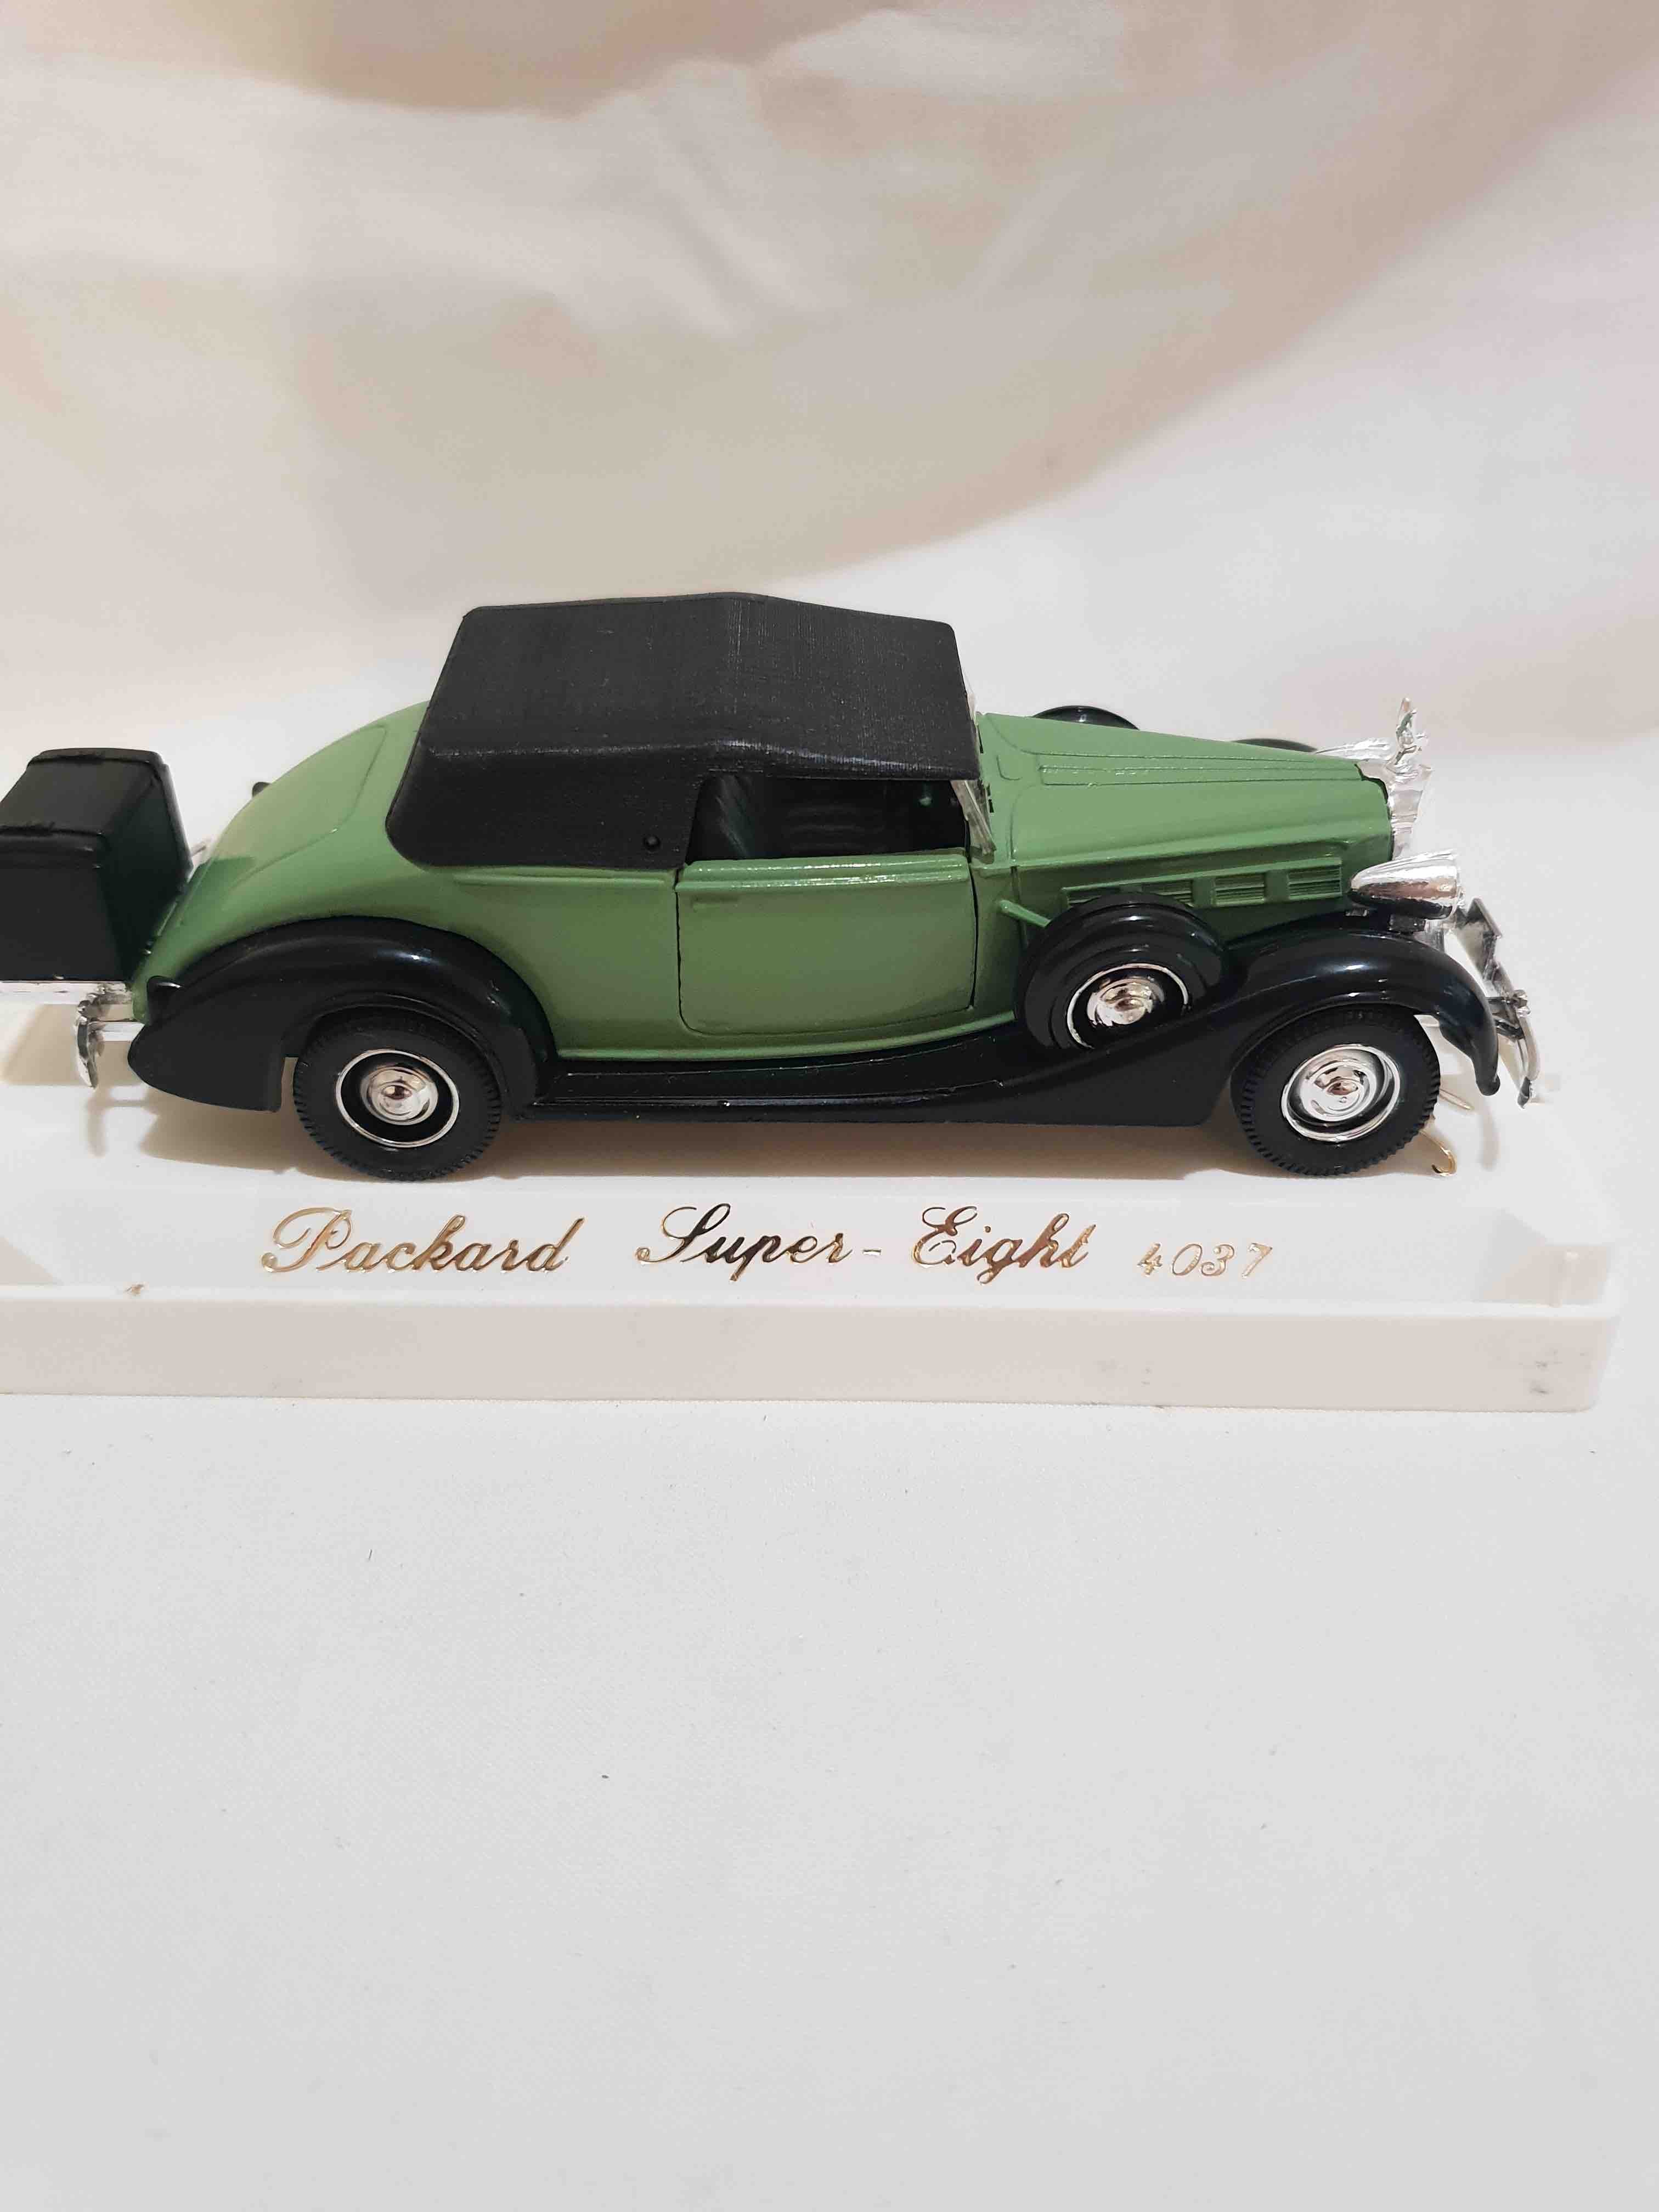 PACKARD SUPER EIGTH 4037 SOLIDO AGE D OR